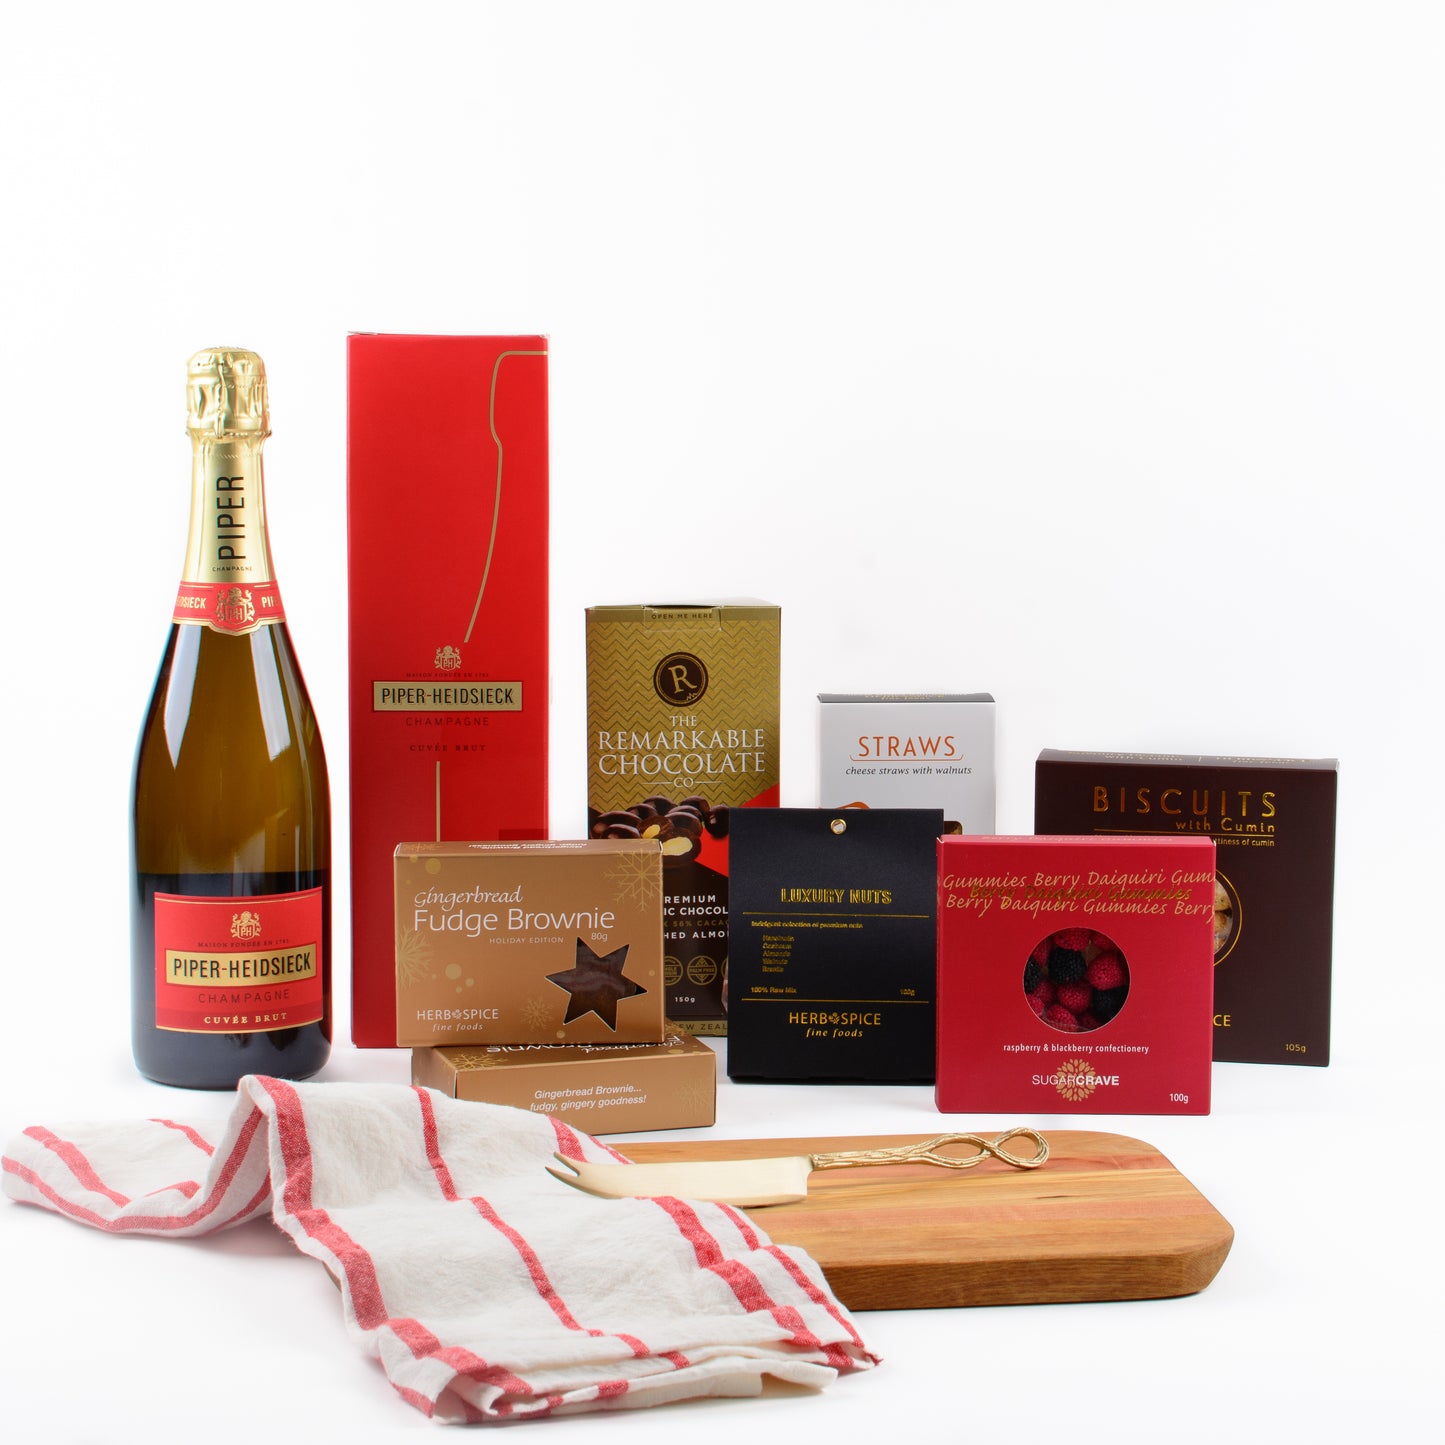 Products displayed out of gift box are champagne, chocolate almonds, savoury biscuits, brownies, candy, nuts, wooden board, cheese knife, linen tea towel.